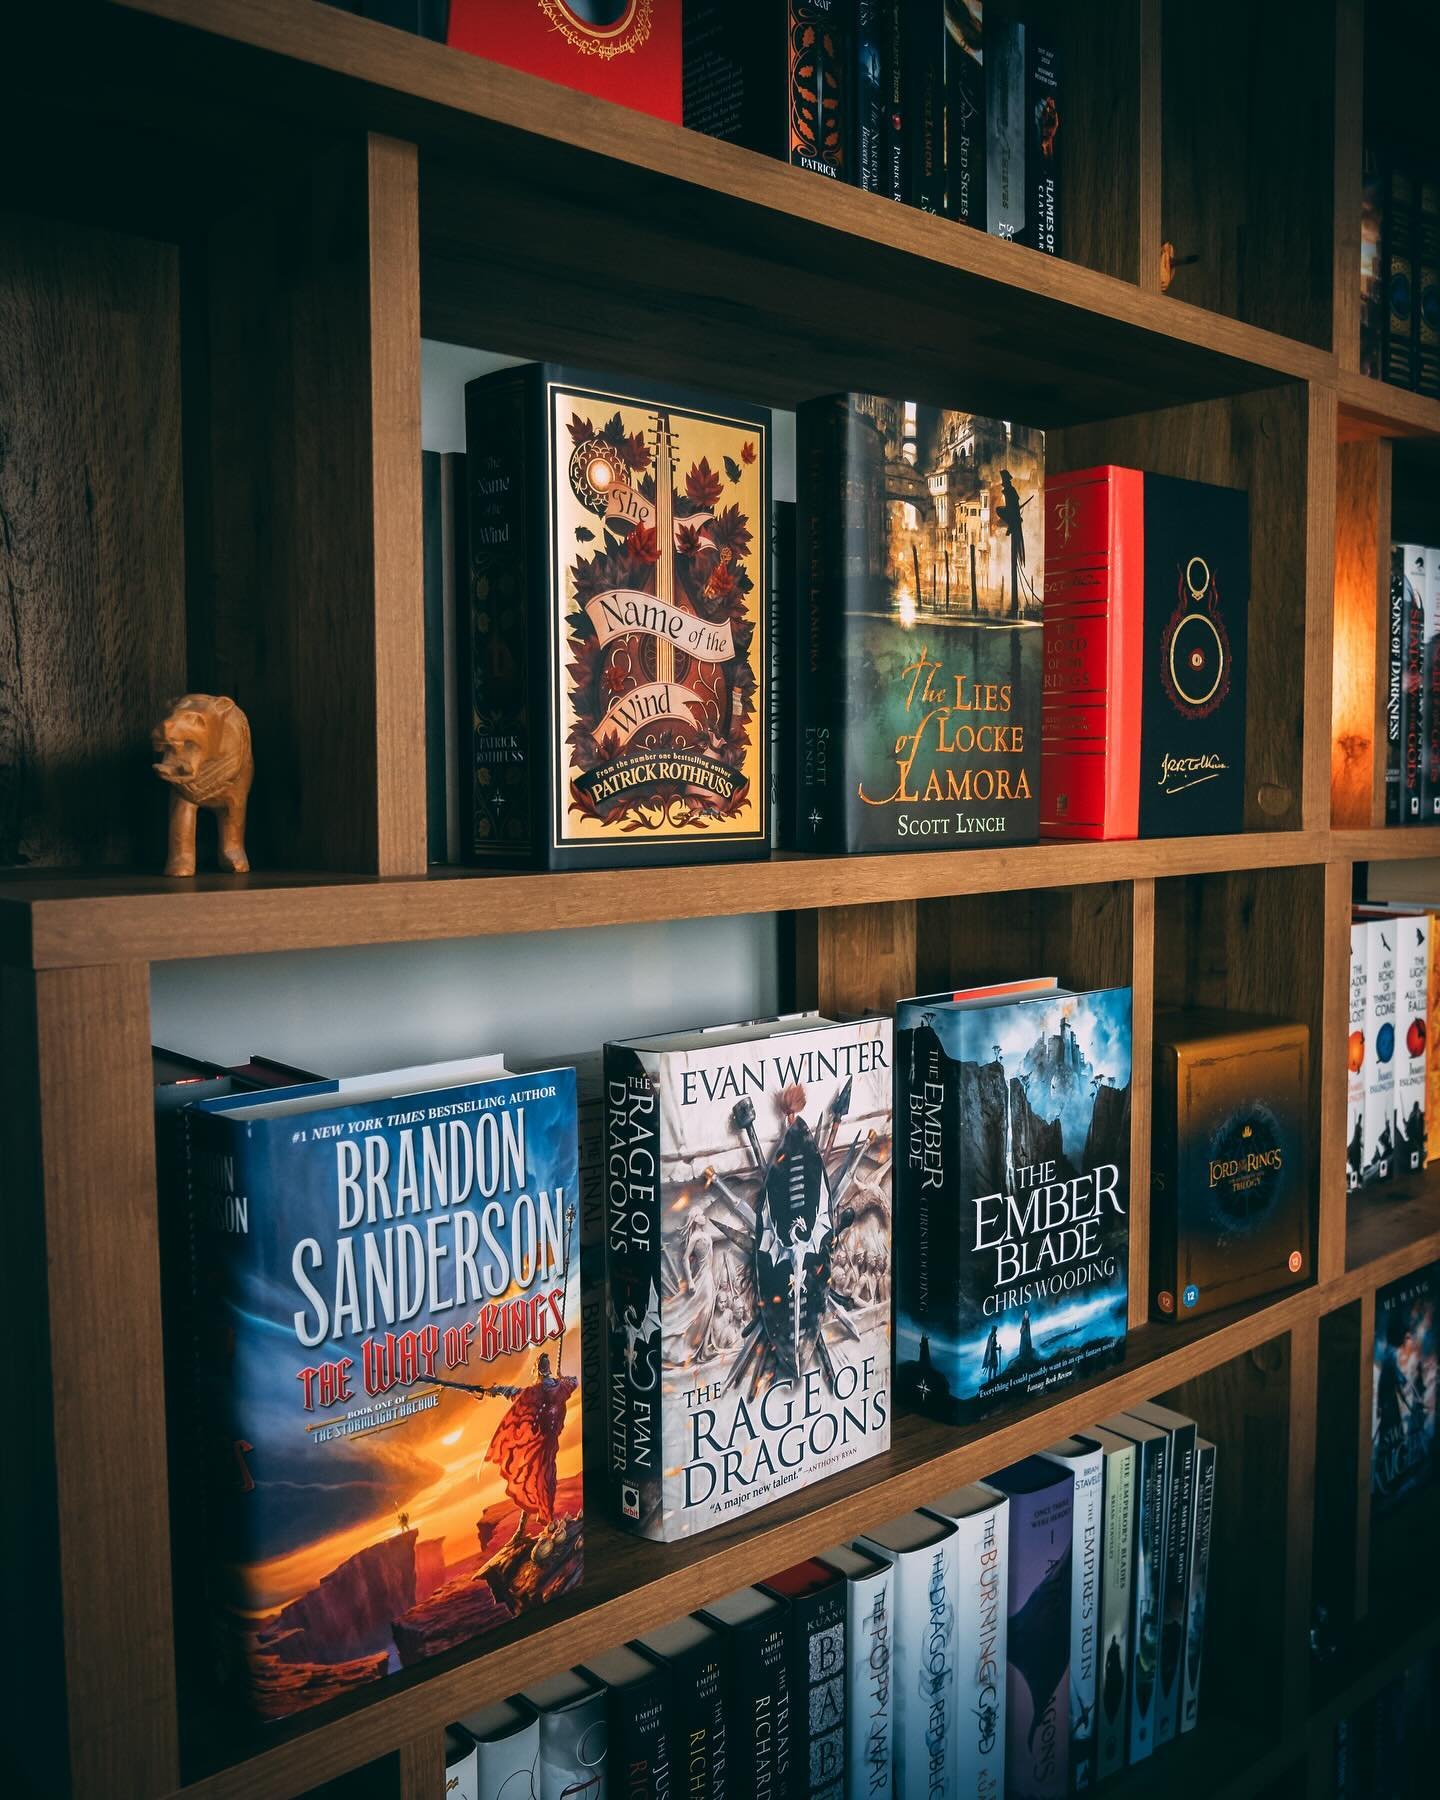 The Six Saturday 👁️

📚 What are some of the books that got you into reading adult fantasy?

For me, these will forever be special as they were some of the books that got me into adult fantasy. There is something about your entry into fantasy that s